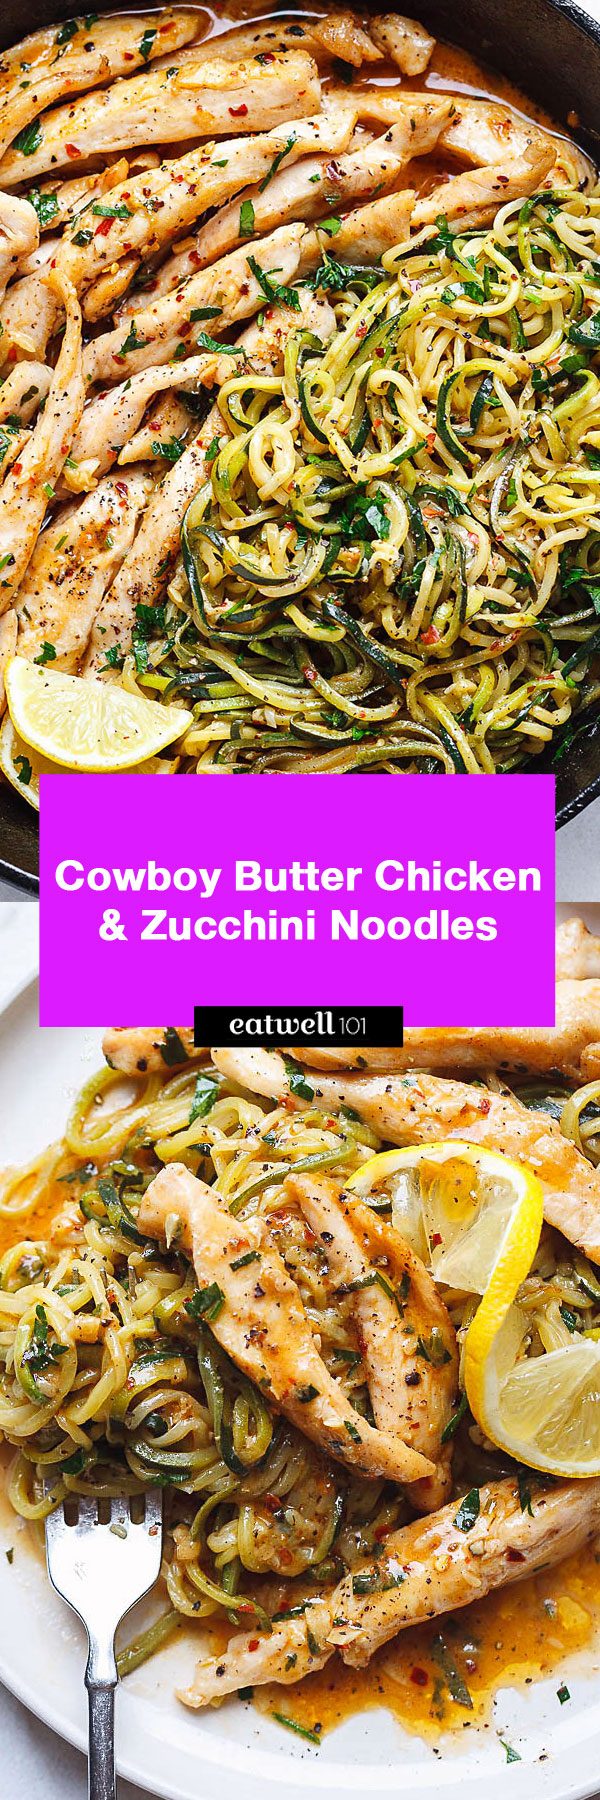 Cowboy Butter Chicken and Zucchini Noodles - #eatwell101 #recipe #keto #paleo #lowcarb #glutenfree #chicken - This GORGEOUS 15-minute paleo dinner idea is simple, easily customizable and pretty much fail-proof.